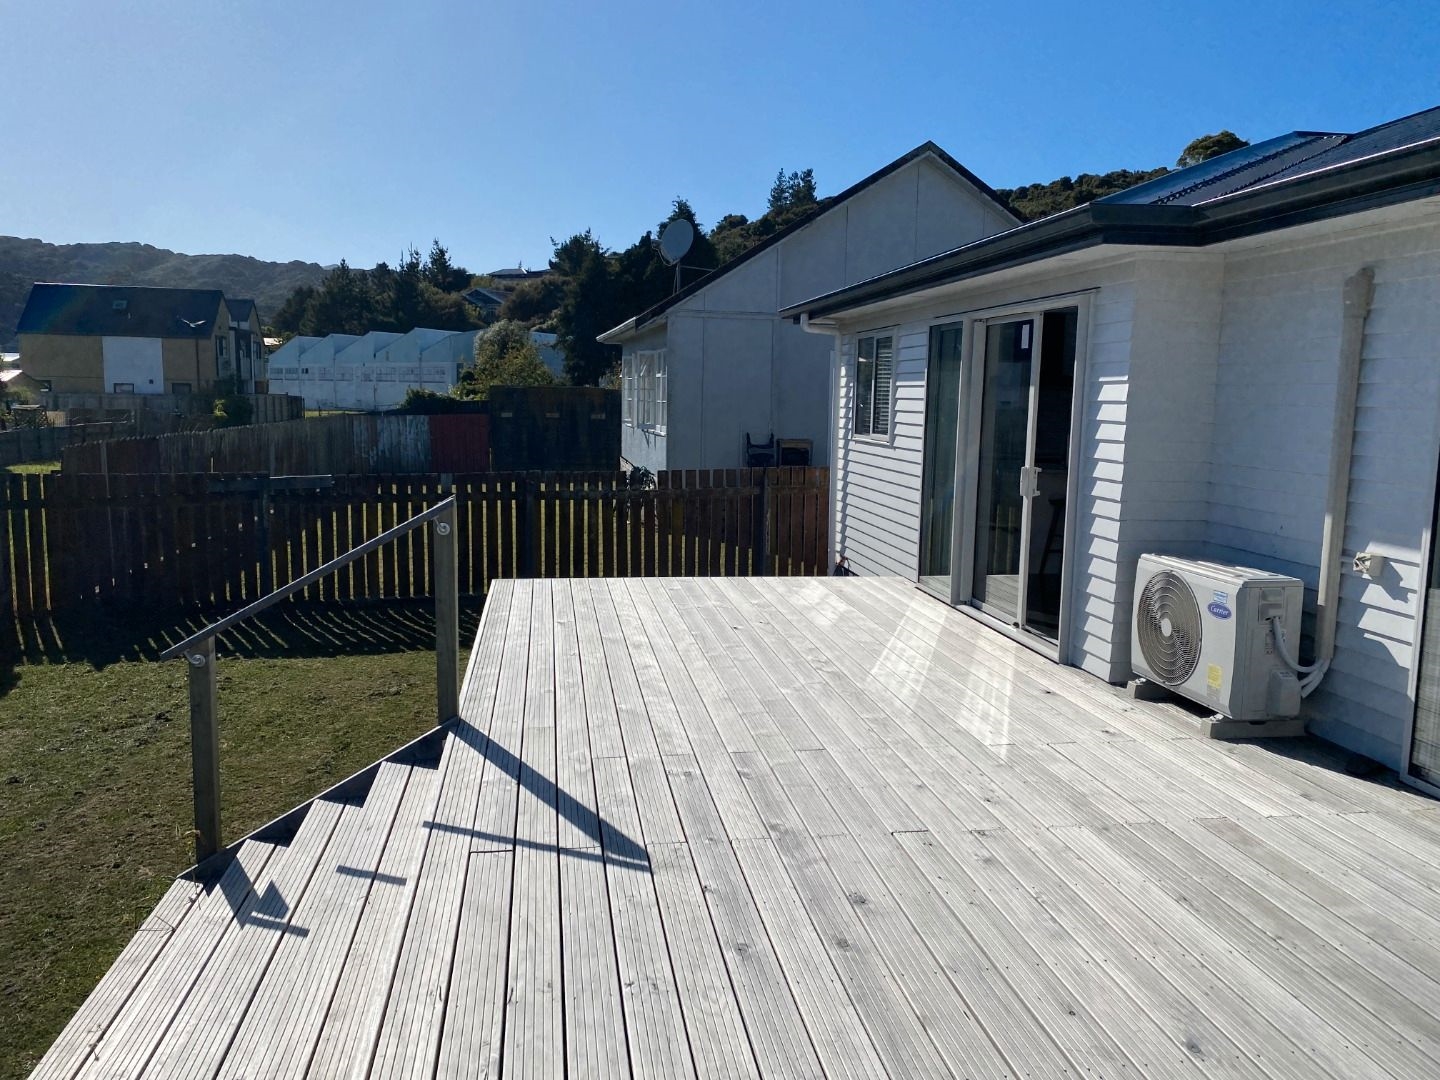 Real Estate For Rent Houses & Apartments : Spacious and sunny in Wainuiomata